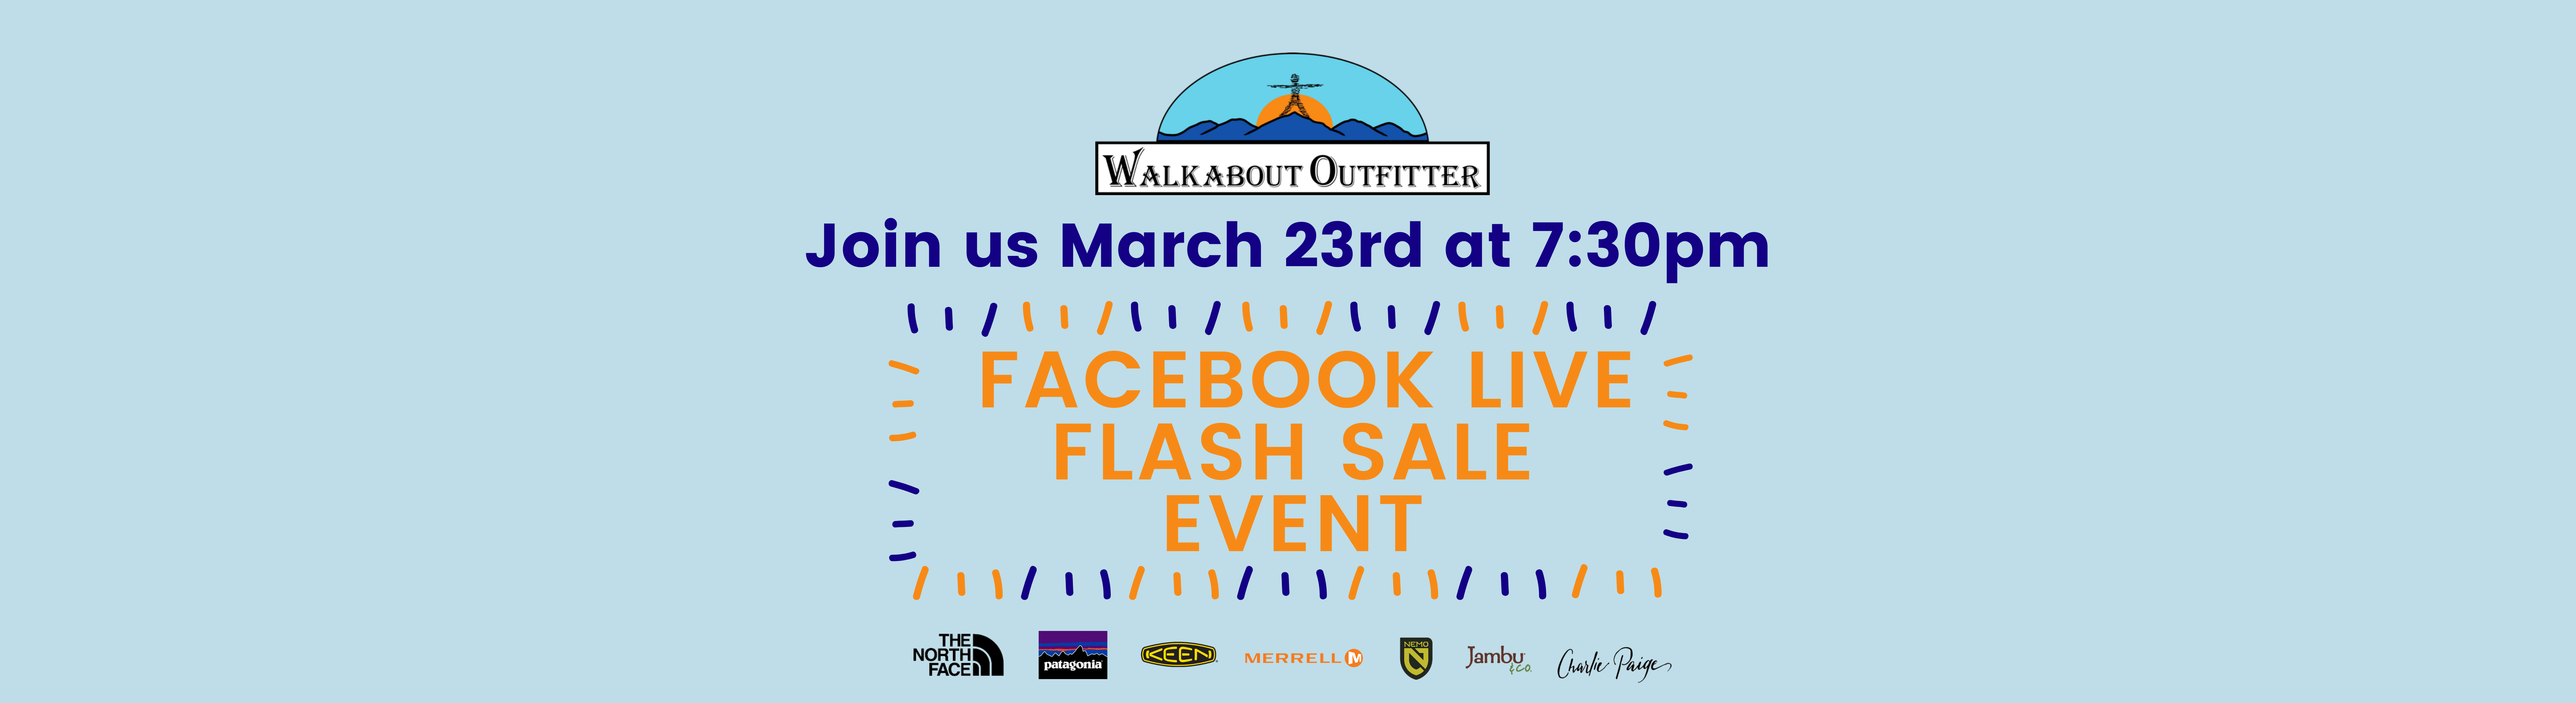 FACEBOOK LIVE FLASH SALE • Tuesday, March 23, 7:30 PM